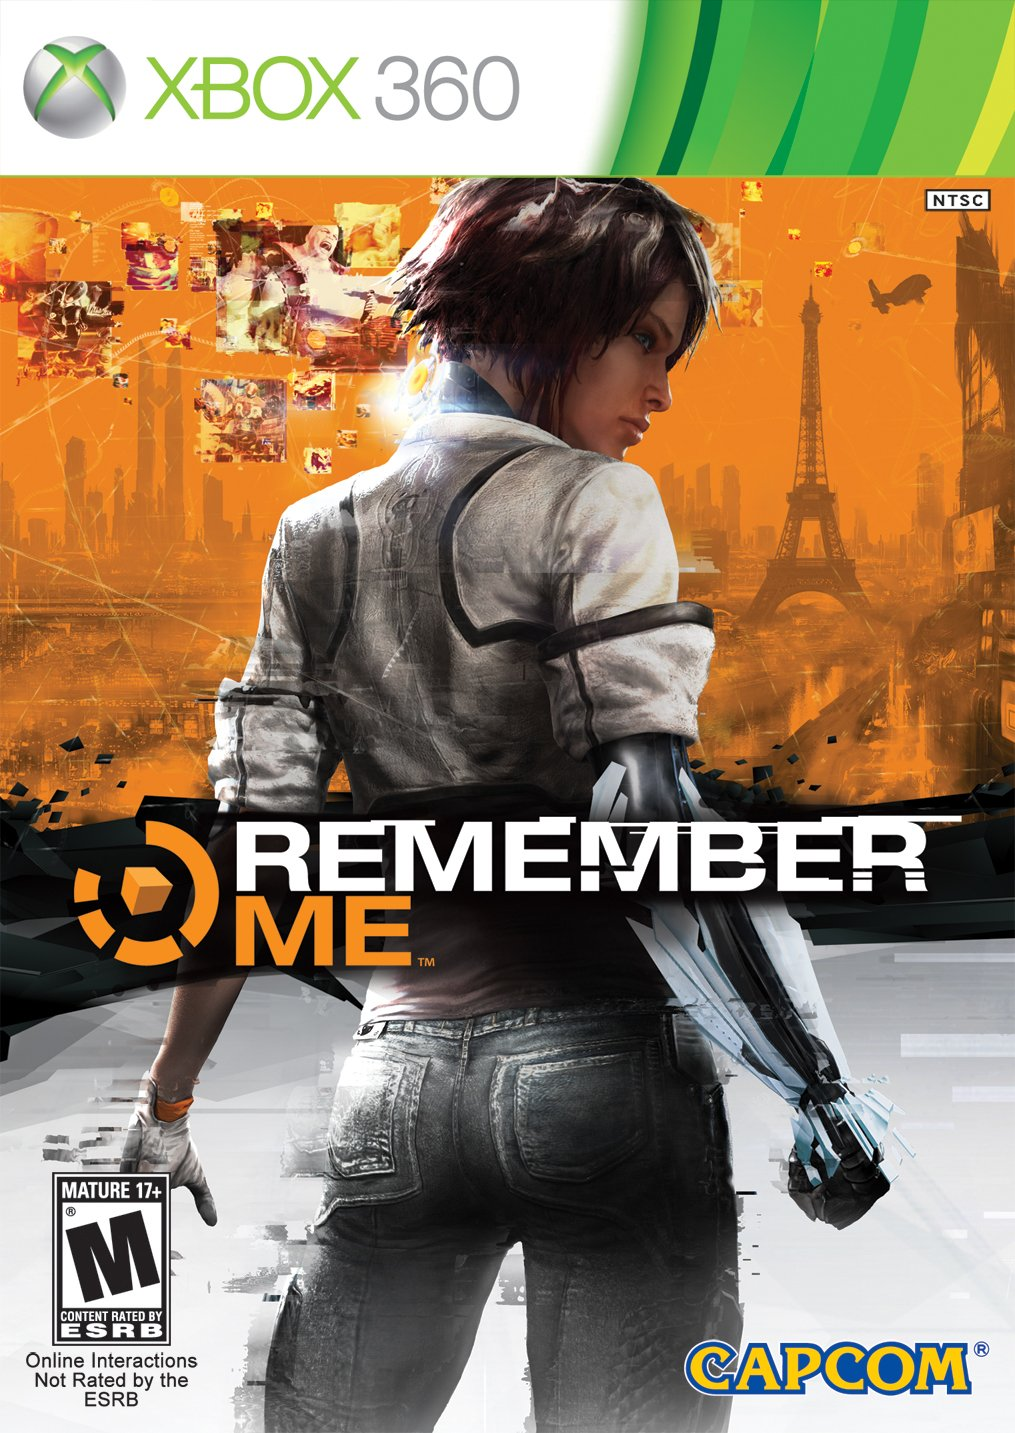 image 81 - Xbox 360 Games Download - REMEMBER ME